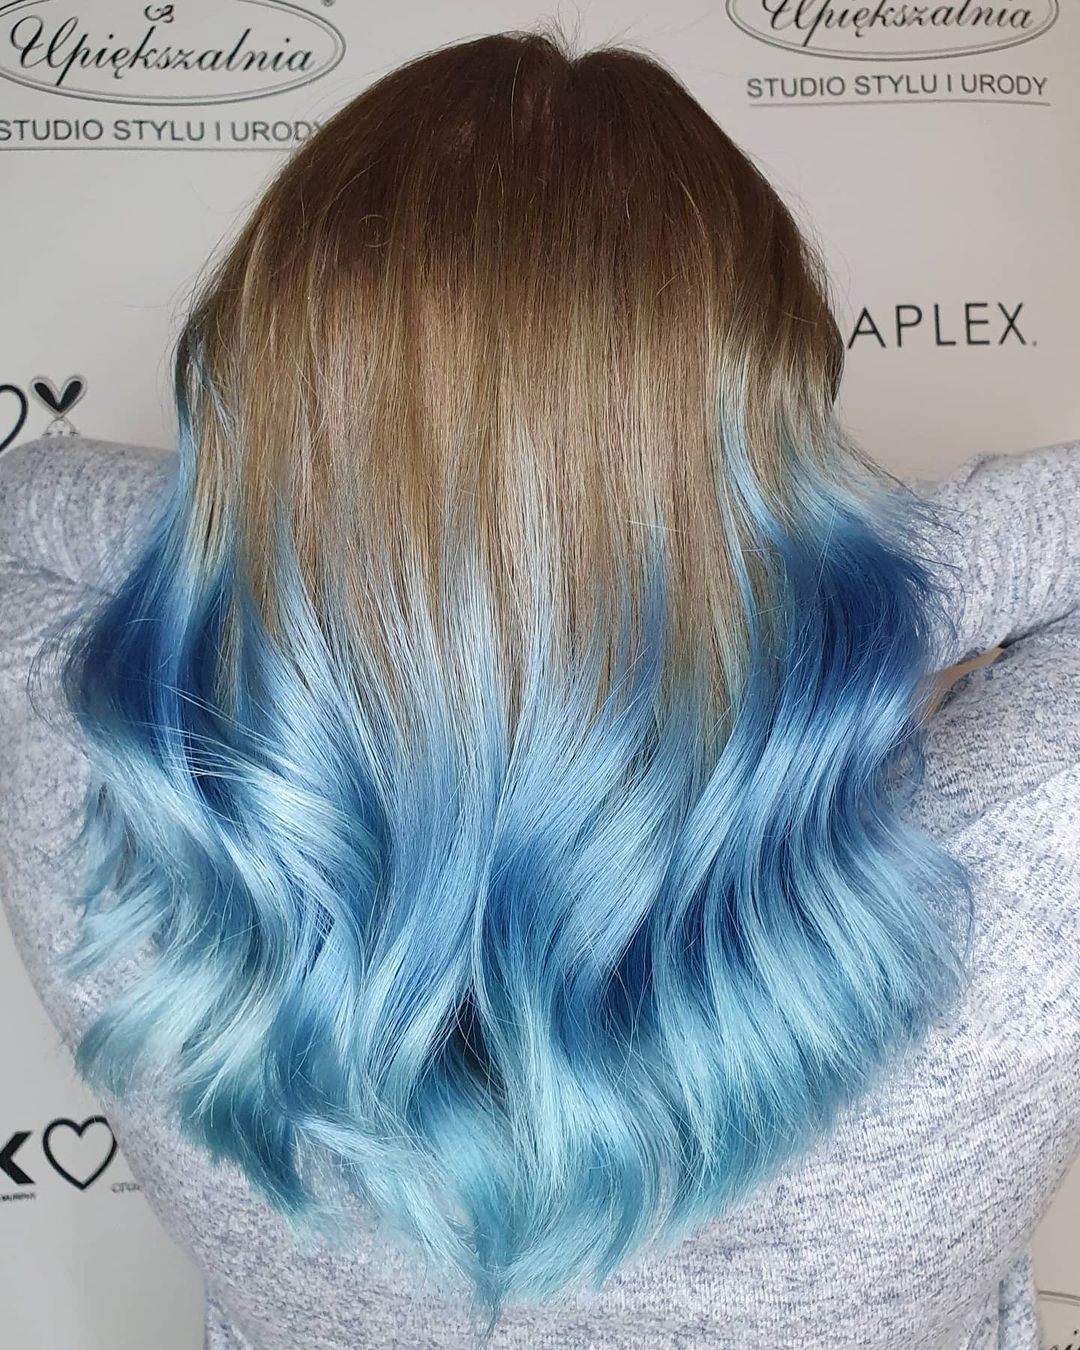 These Will Be the Most Talked About Hair Colors of Summer 2016 |  NaturallyCurly.com